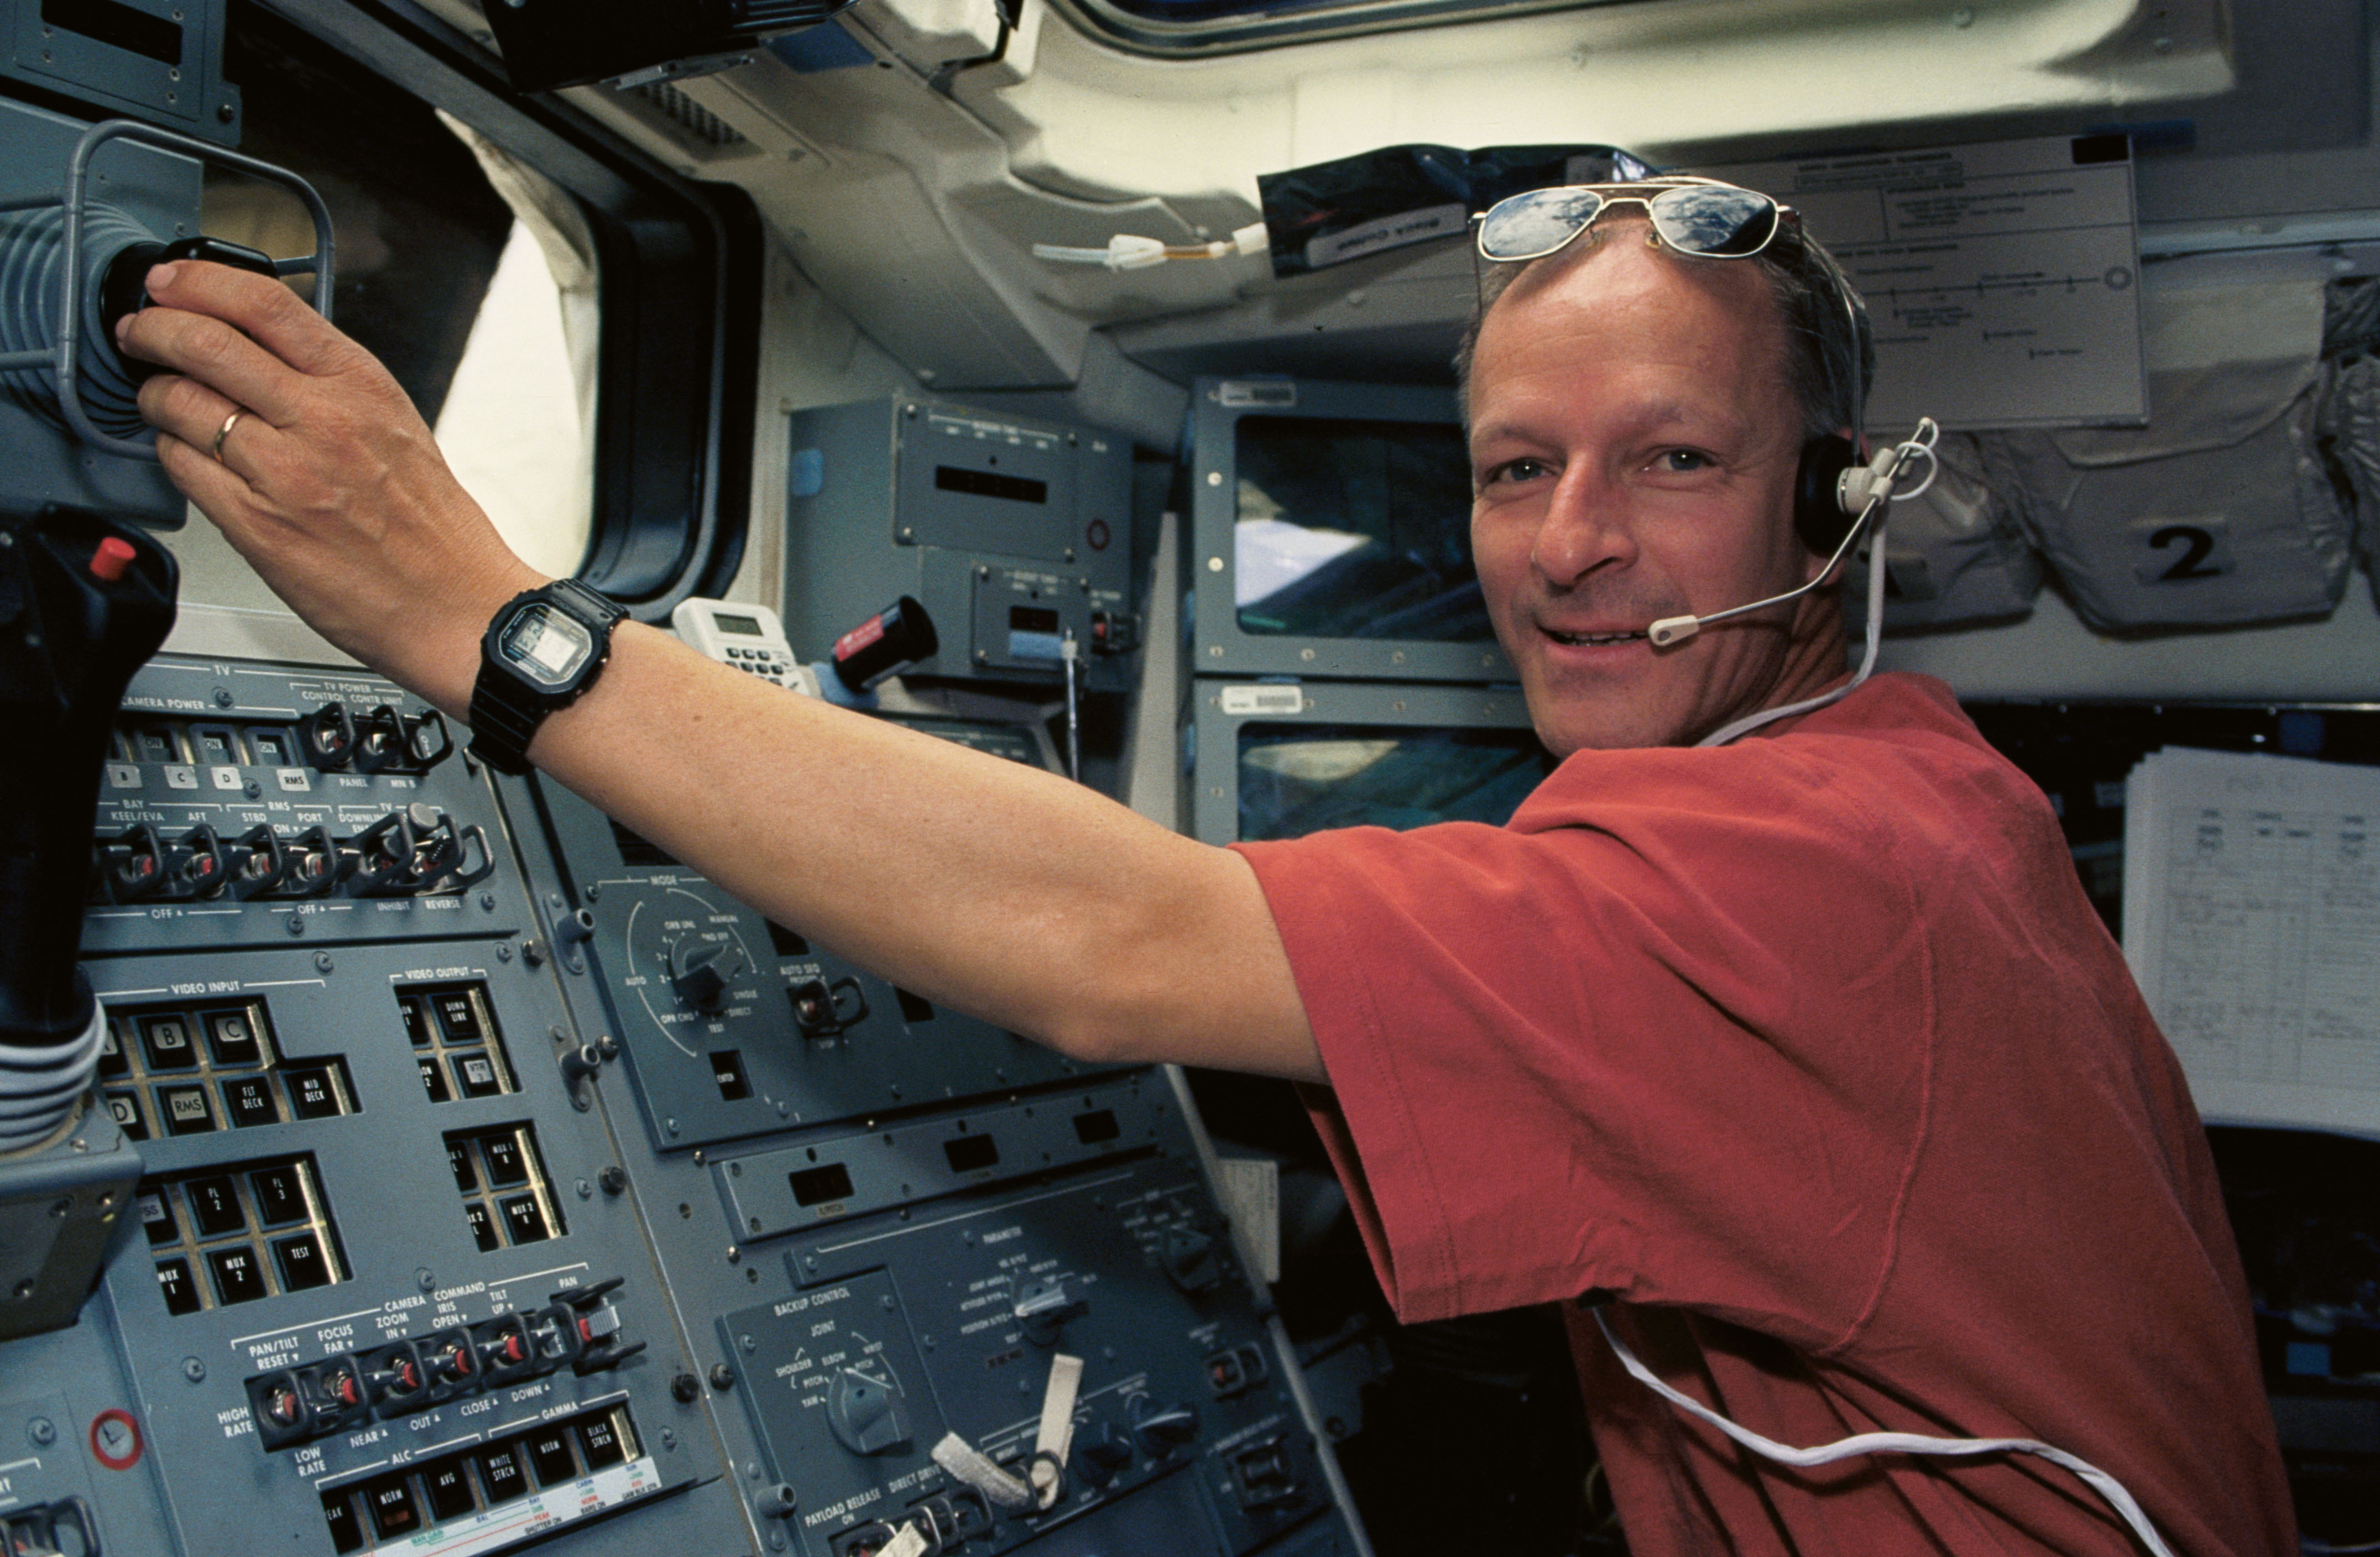 On the shuttle’s flight deck, European Space Agency astronaut Claude Nicollier operates the RMS to grapple Hubble